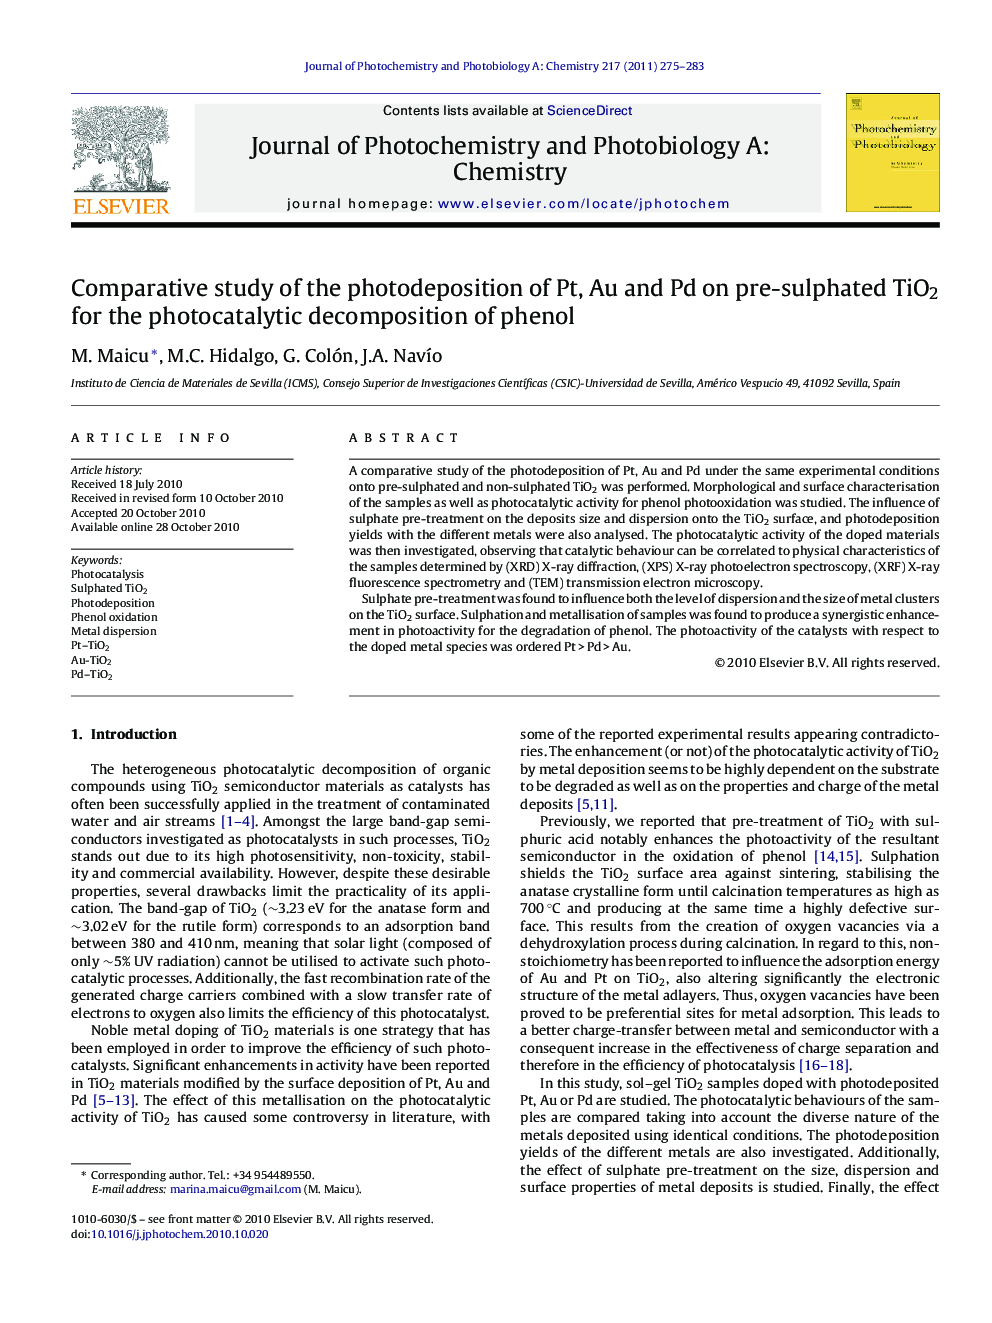 Comparative study of the photodeposition of Pt, Au and Pd on pre-sulphated TiO2 for the photocatalytic decomposition of phenol